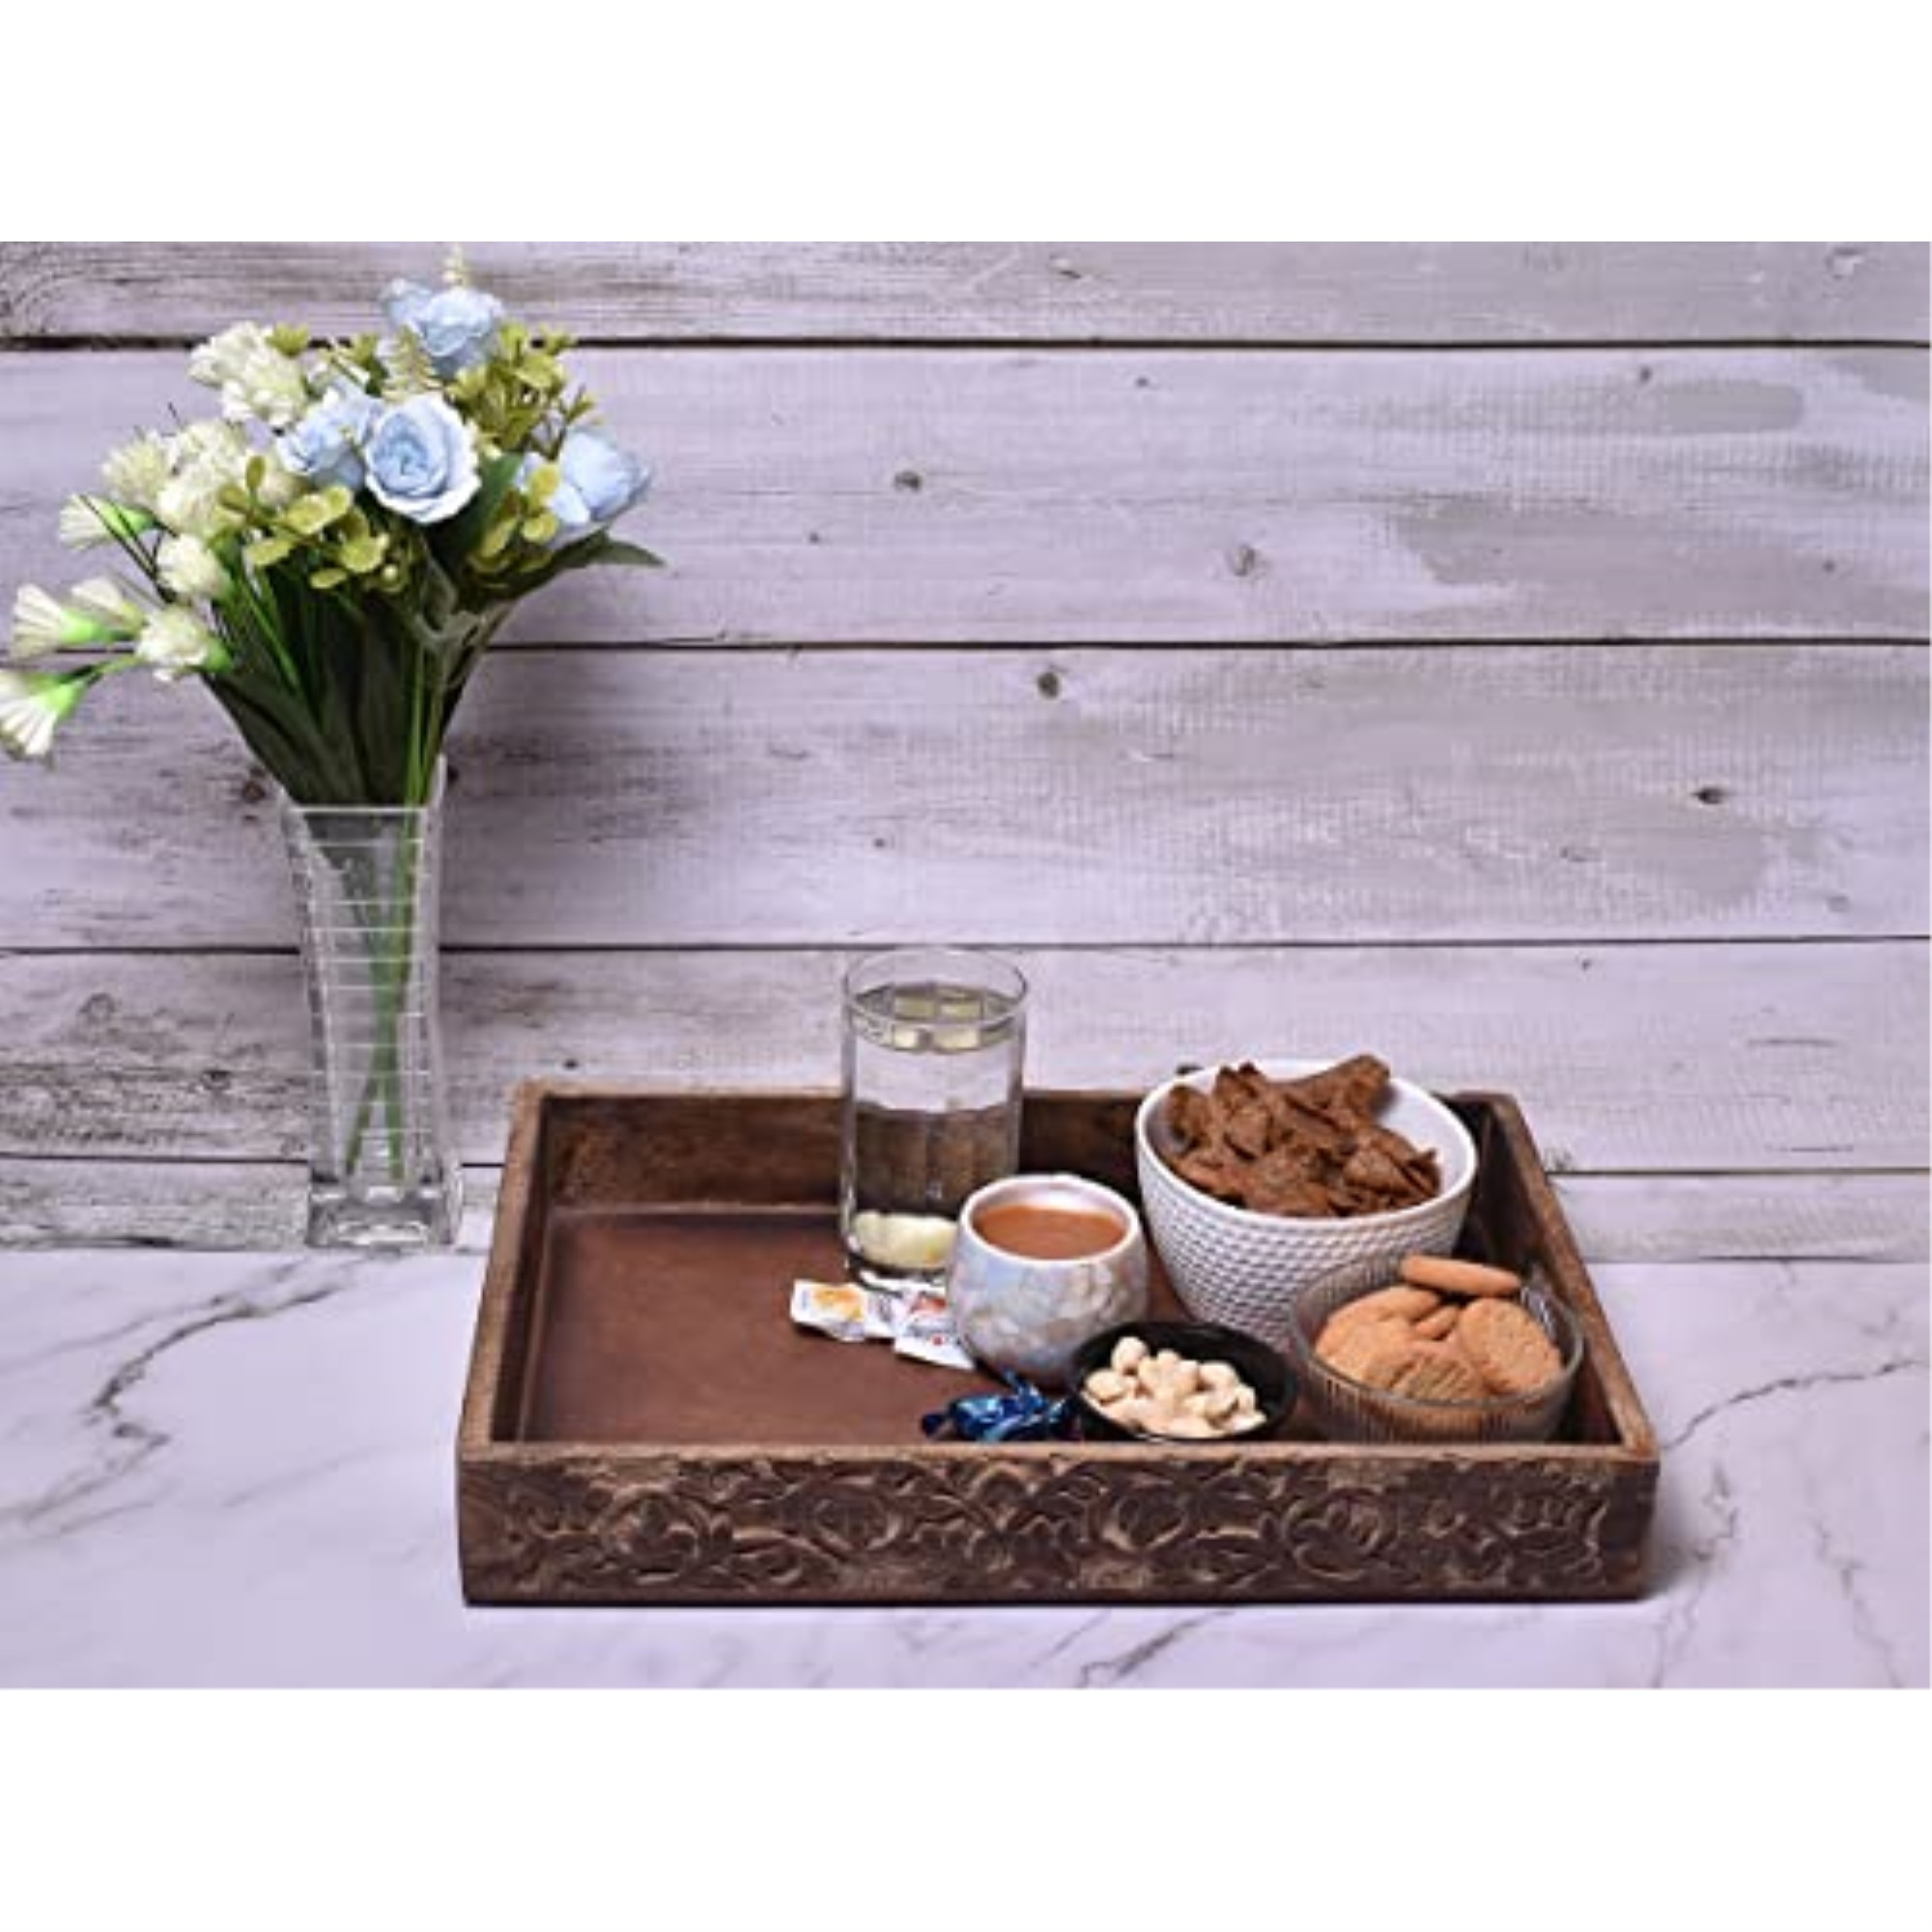 STORE INDYA Hand Carved Wooden Breakfast Serving Tray with Handle for Breakfast Tea Snack Dessert | Kitchen Dining Serve-Ware 